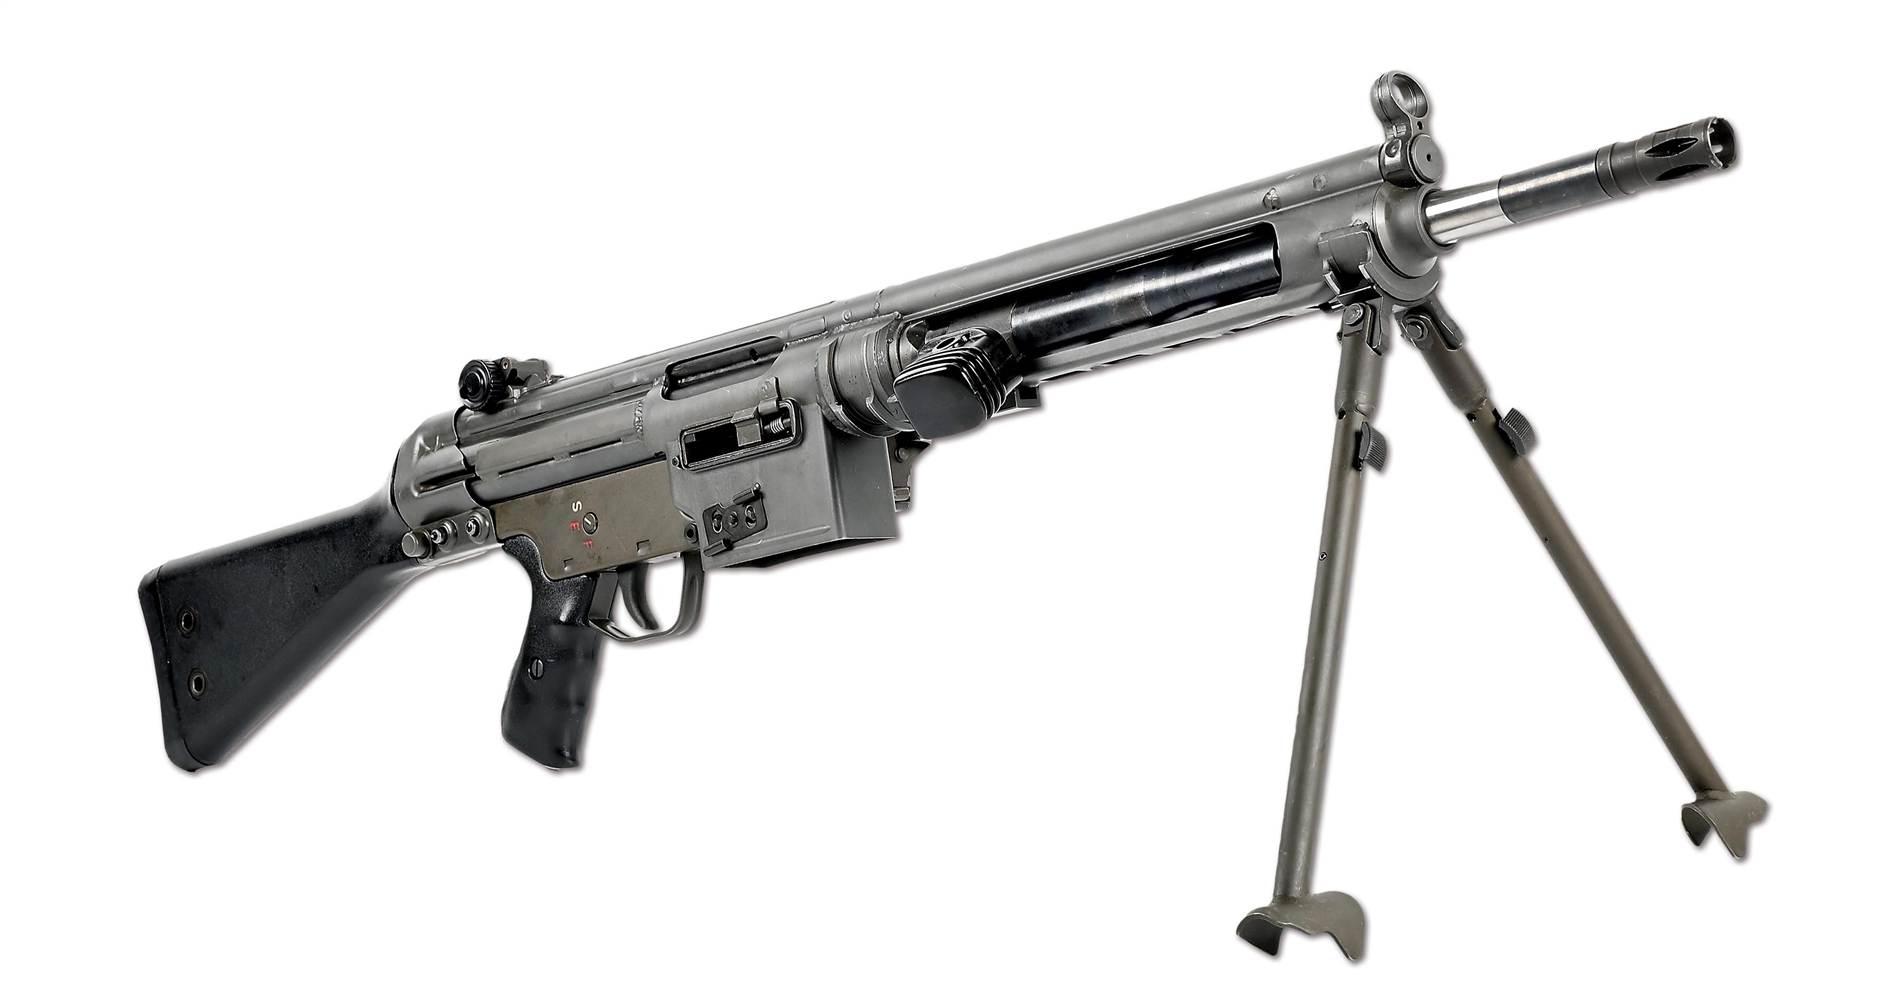 (N) FINE & HIGHLY DESIRABLE QUALIFIED MANUFACTURING HK21 GENERAL PURPOSE MACHINE GUN (FULLY TRANSFERABLE).